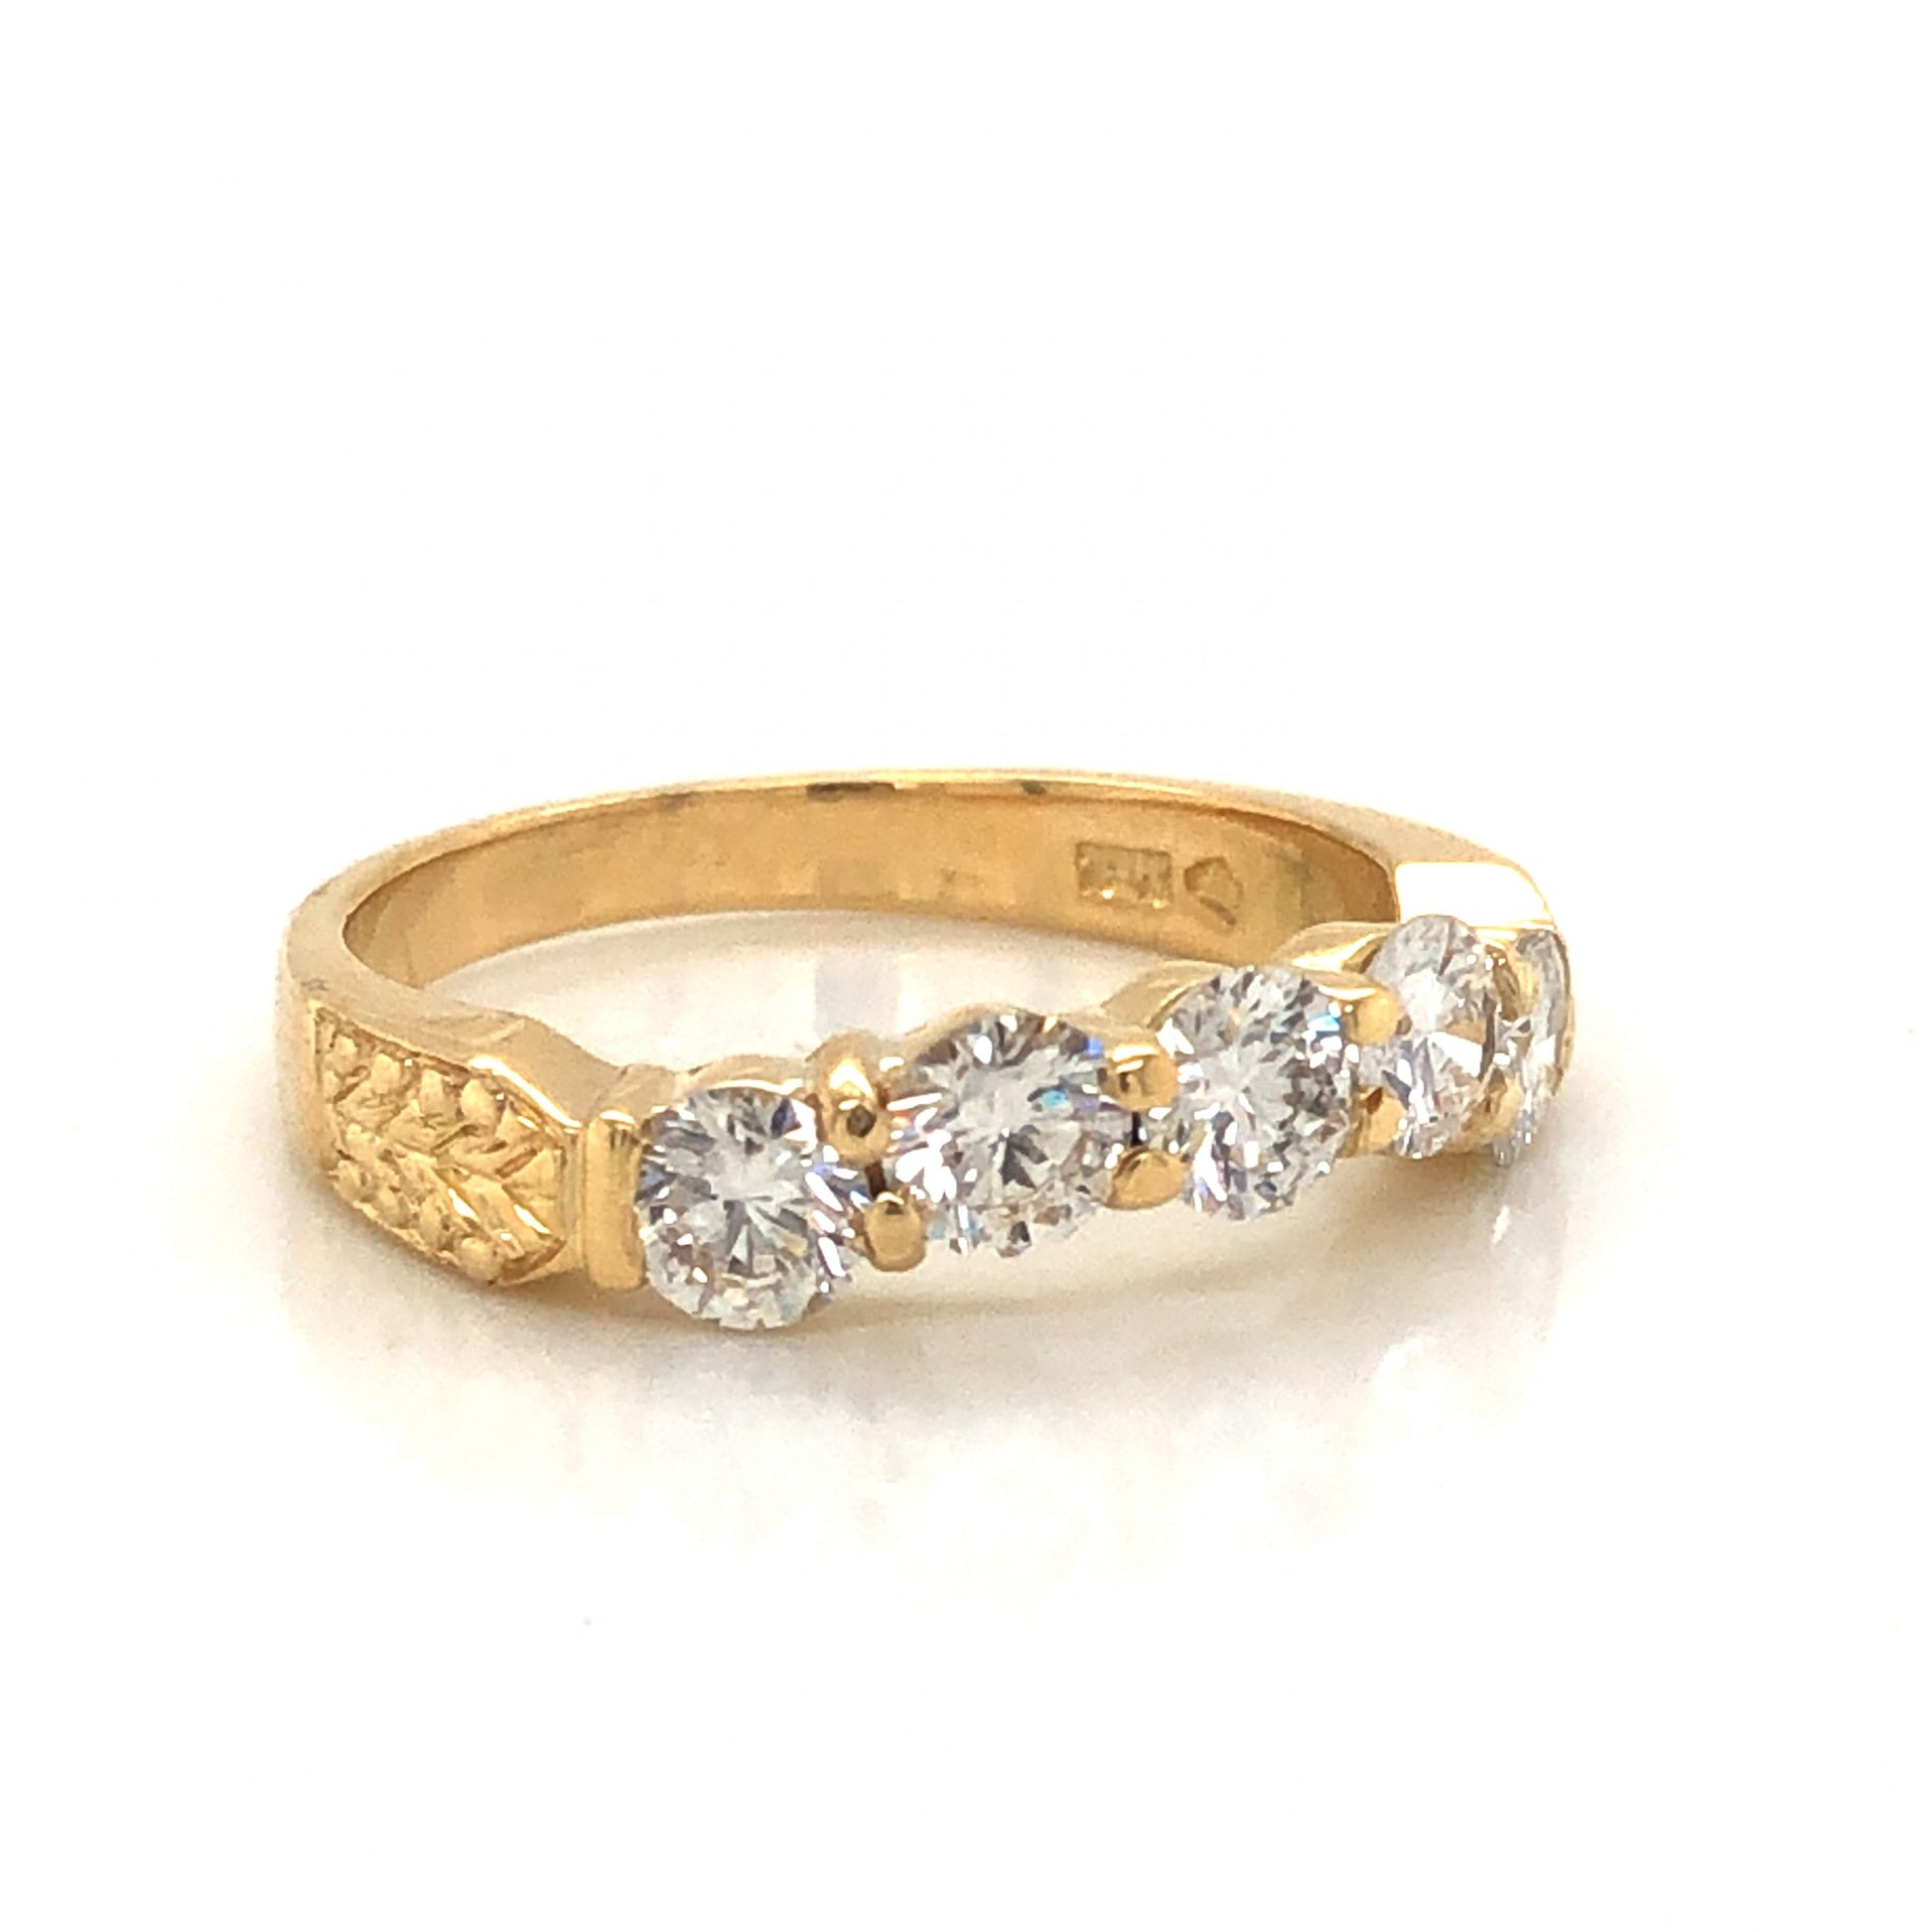 1.15 Curved Diamond Wedding Band in 18k Yellow GoldComposition: 18 Karat Yellow Gold Ring Size: 6.5 Total Diamond Weight: 1.15ct Total Gram Weight: 4.0 g Inscription: 18K 
      